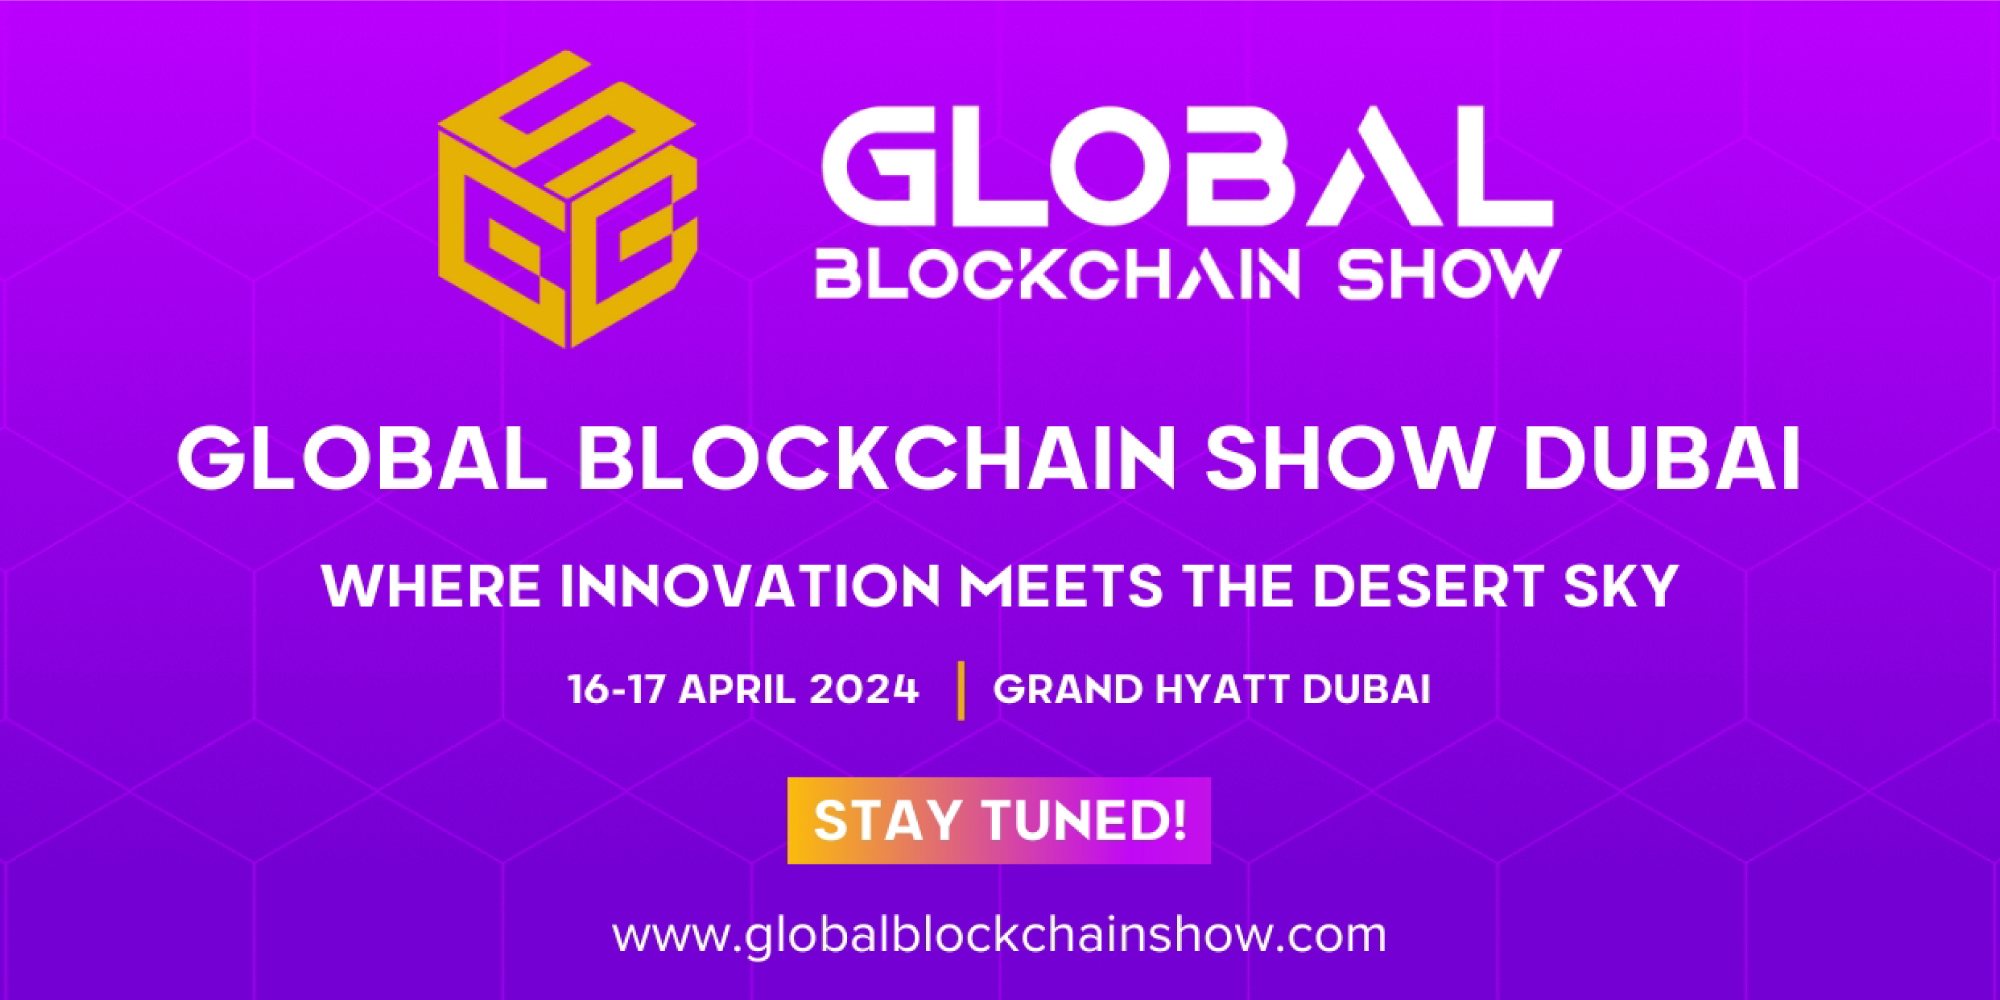 Global Blockchain Show, Dubai, to gather Blockchain and Web3 experts, provide networking opportunities